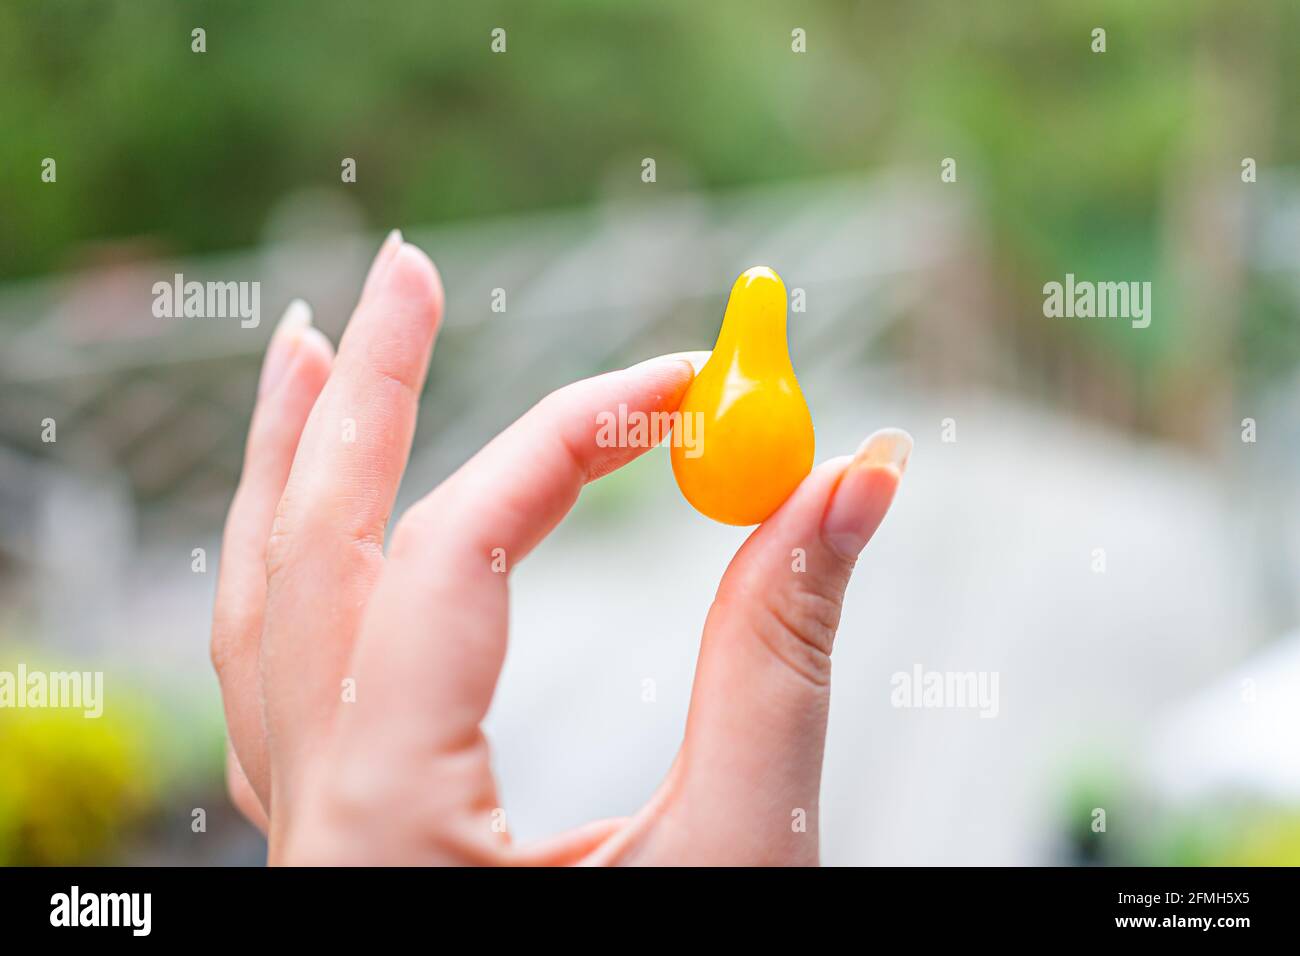 Macro closeup of unique small cherry yellow pear tomatoes harvested from garden with woman holding fruit and background of garden deck Stock Photo